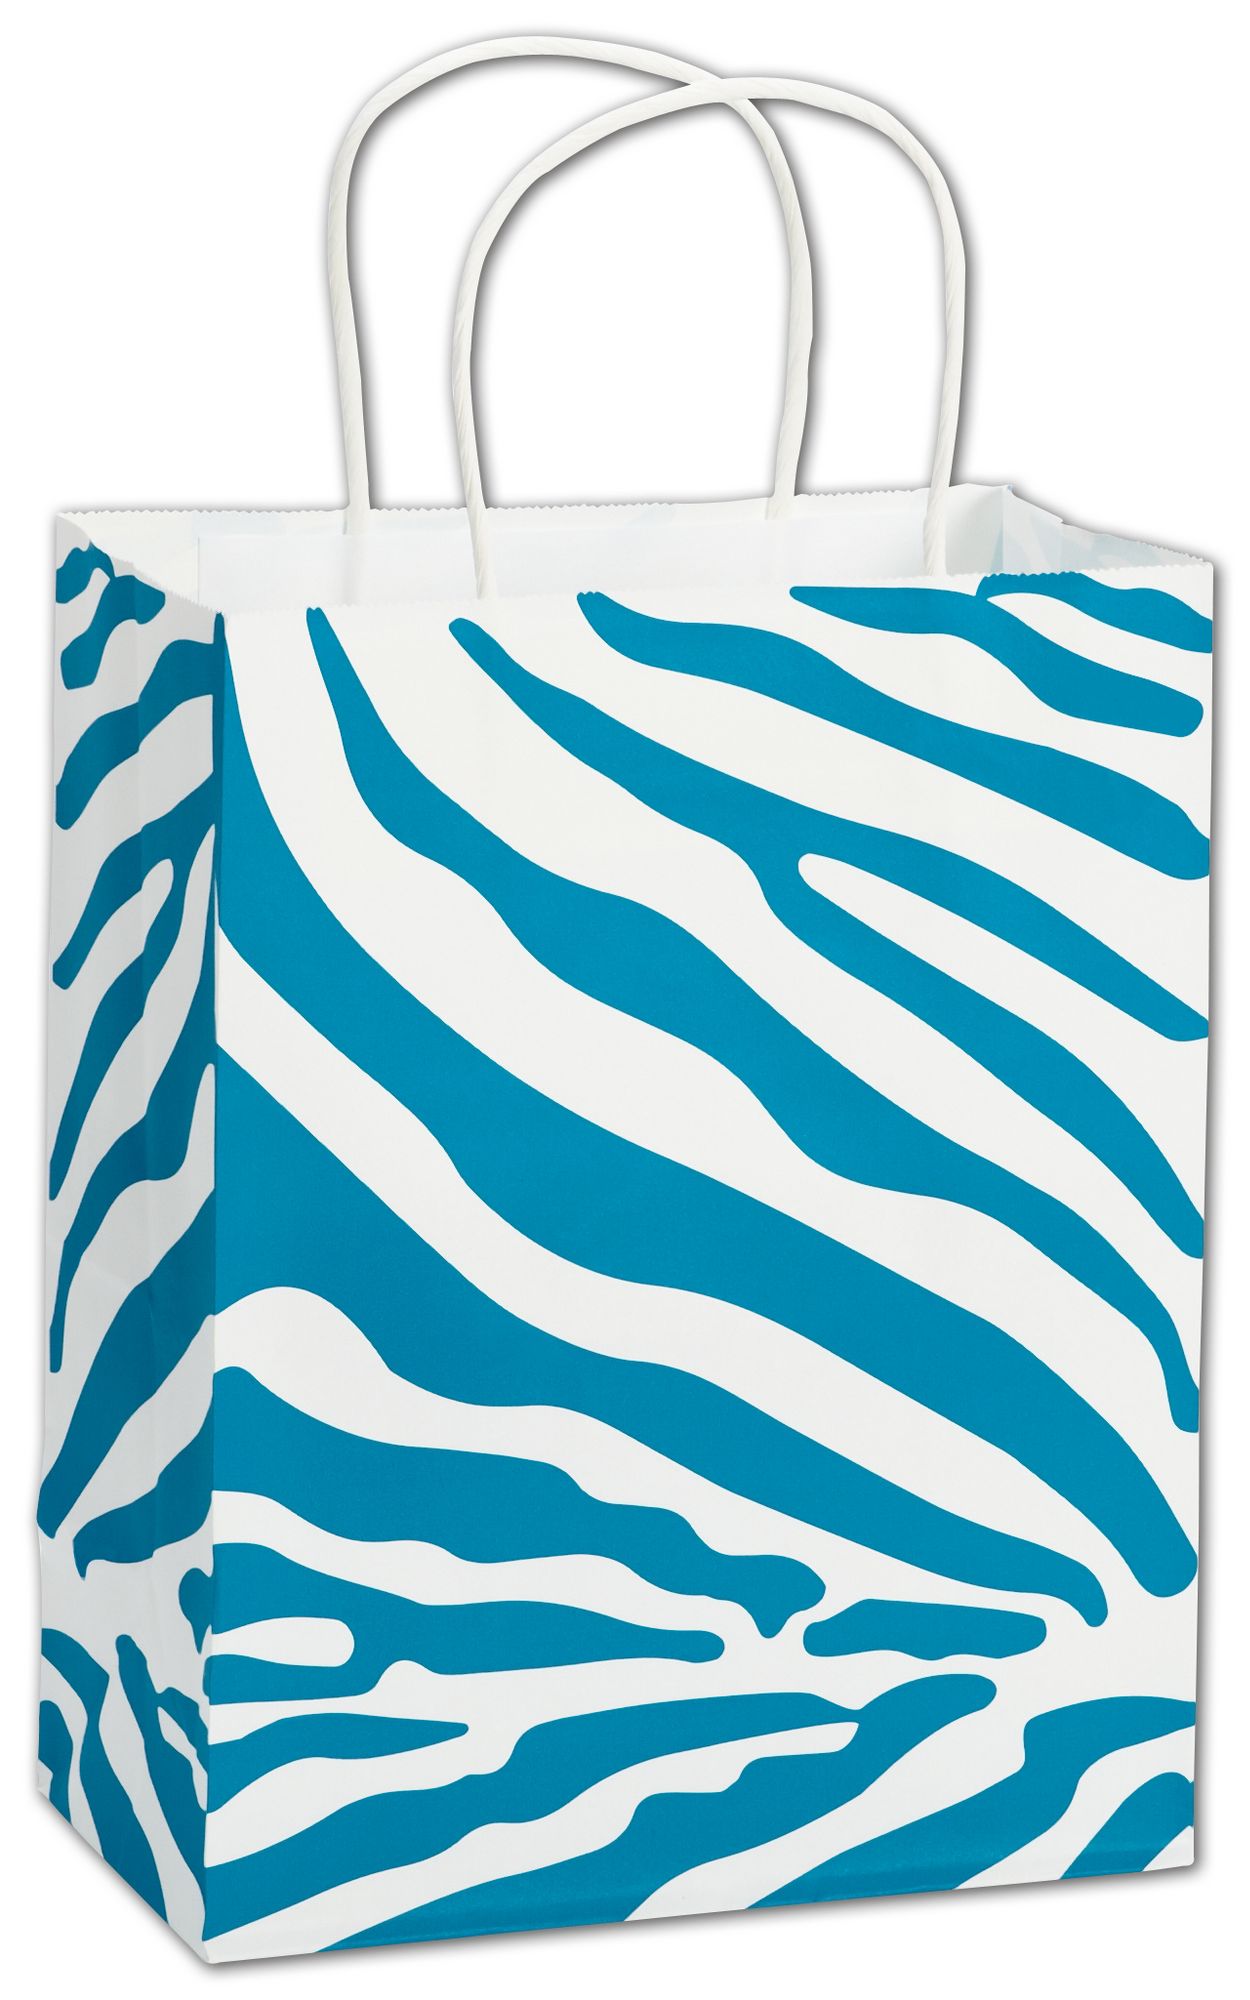 Paper Shopping Bag with Turquoise Cheetah Print makes wrapping or gift giving fun.